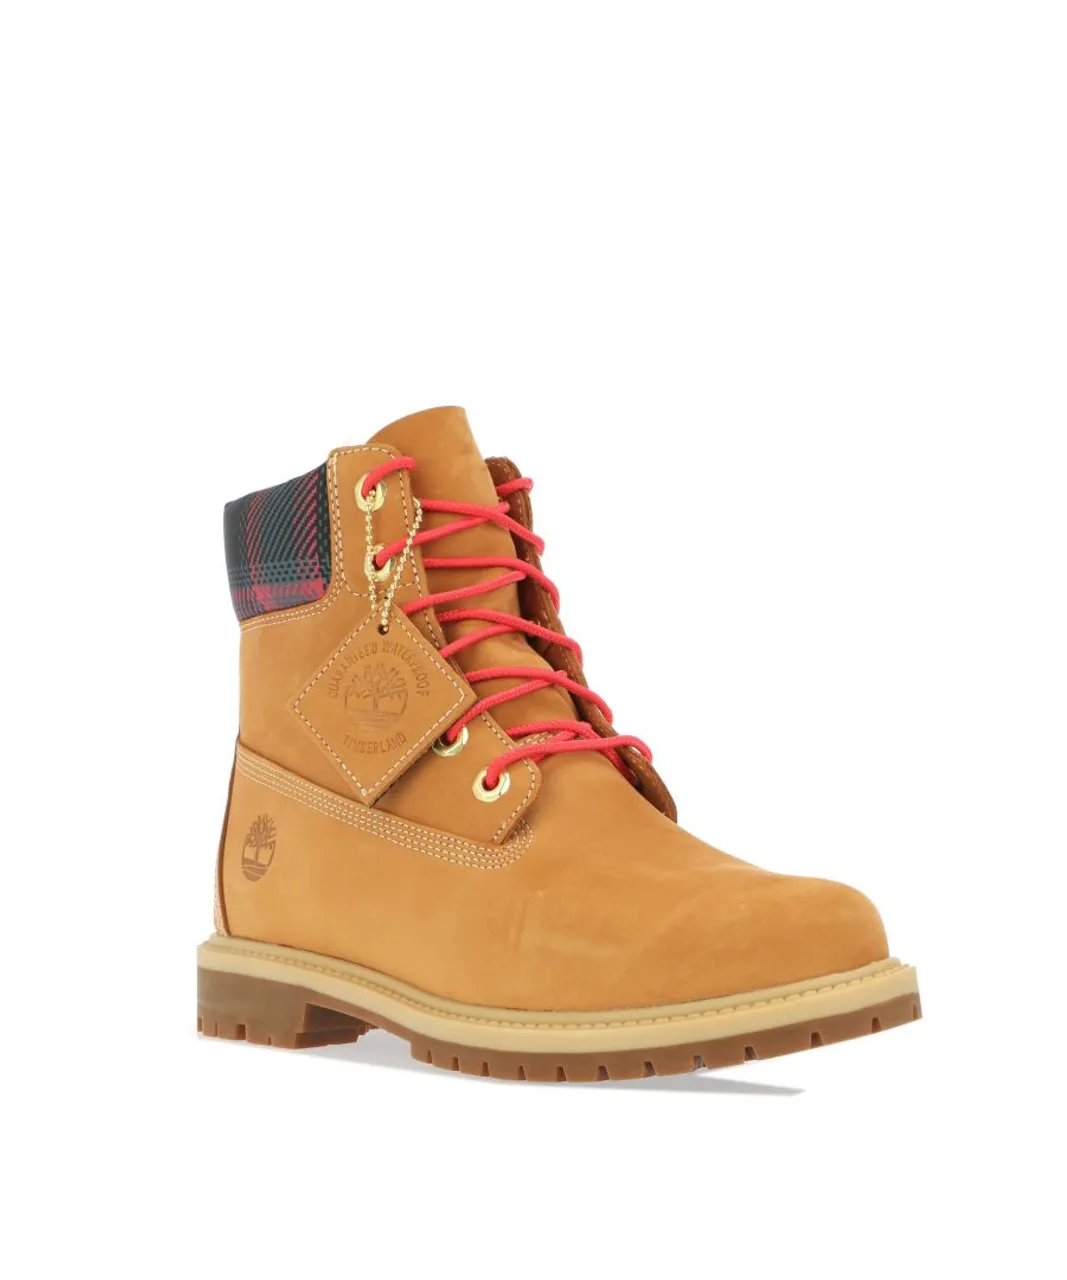 Timberland Womenss Heritage 6 Inch Waterproof Boots in Wheat - Natural Leather (archived)